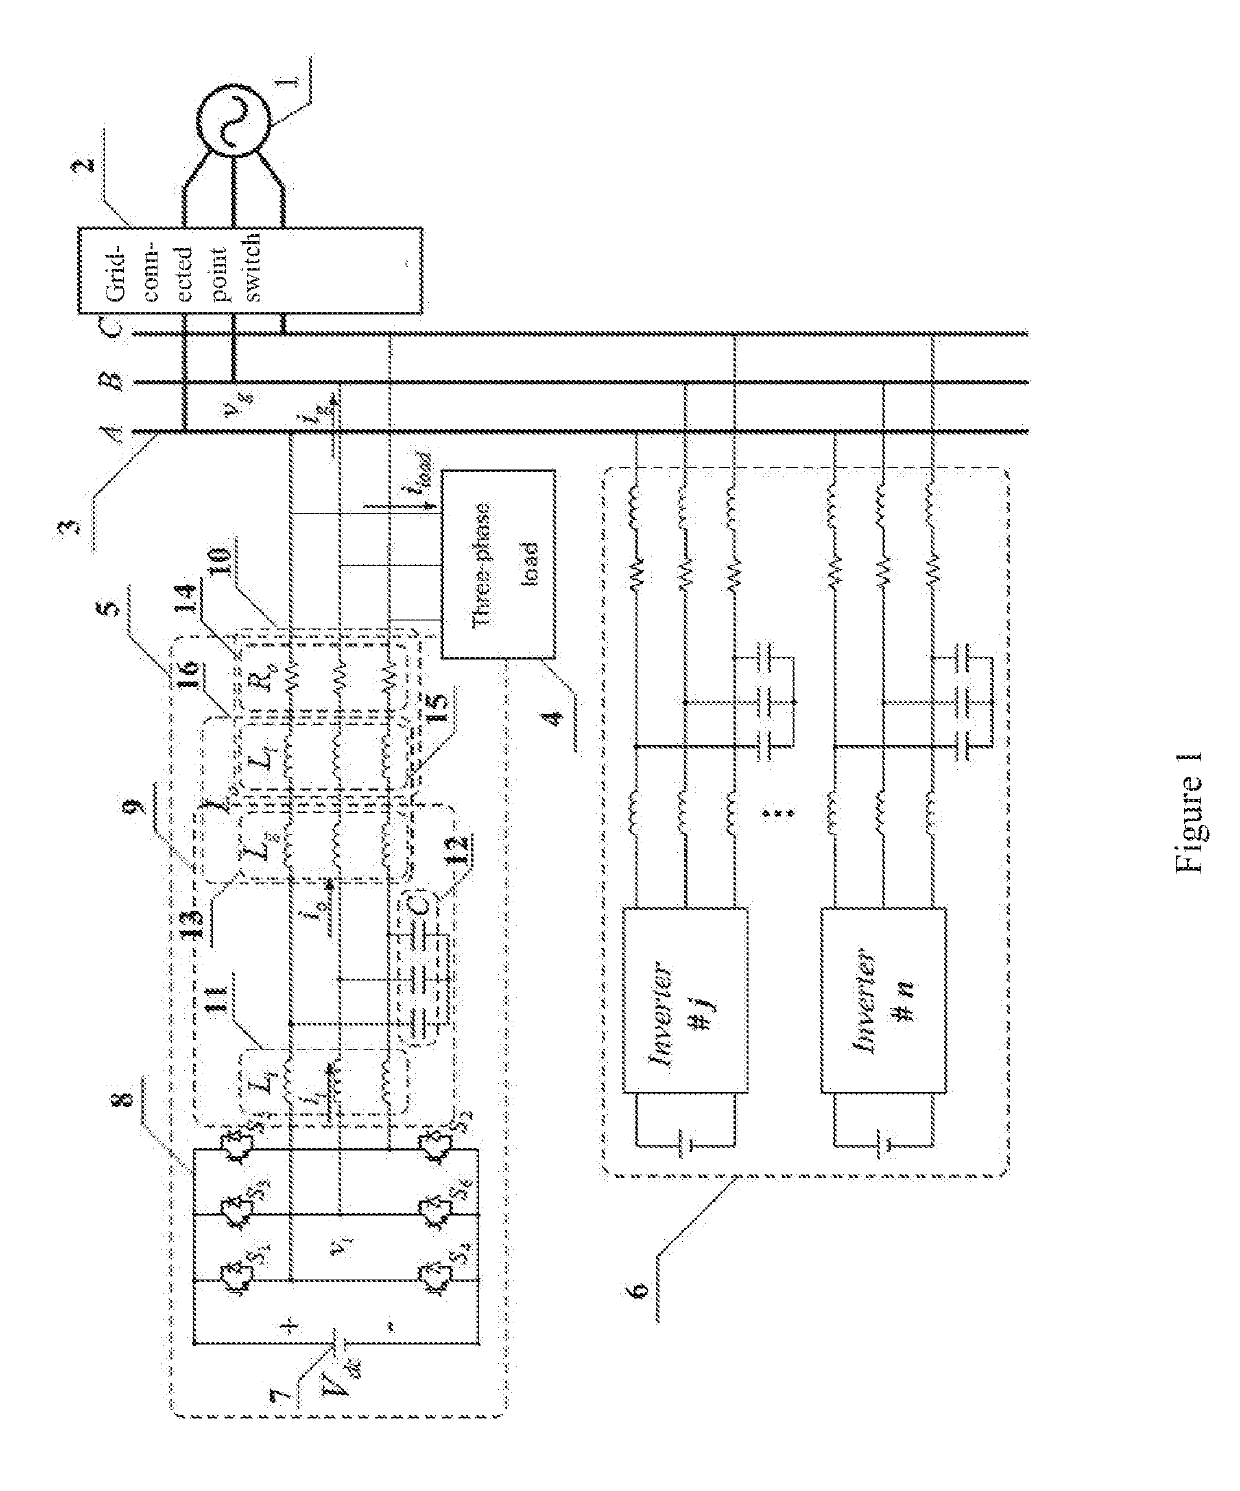 Nonlinear control method for micro-grid inverter with Anti-disturbance